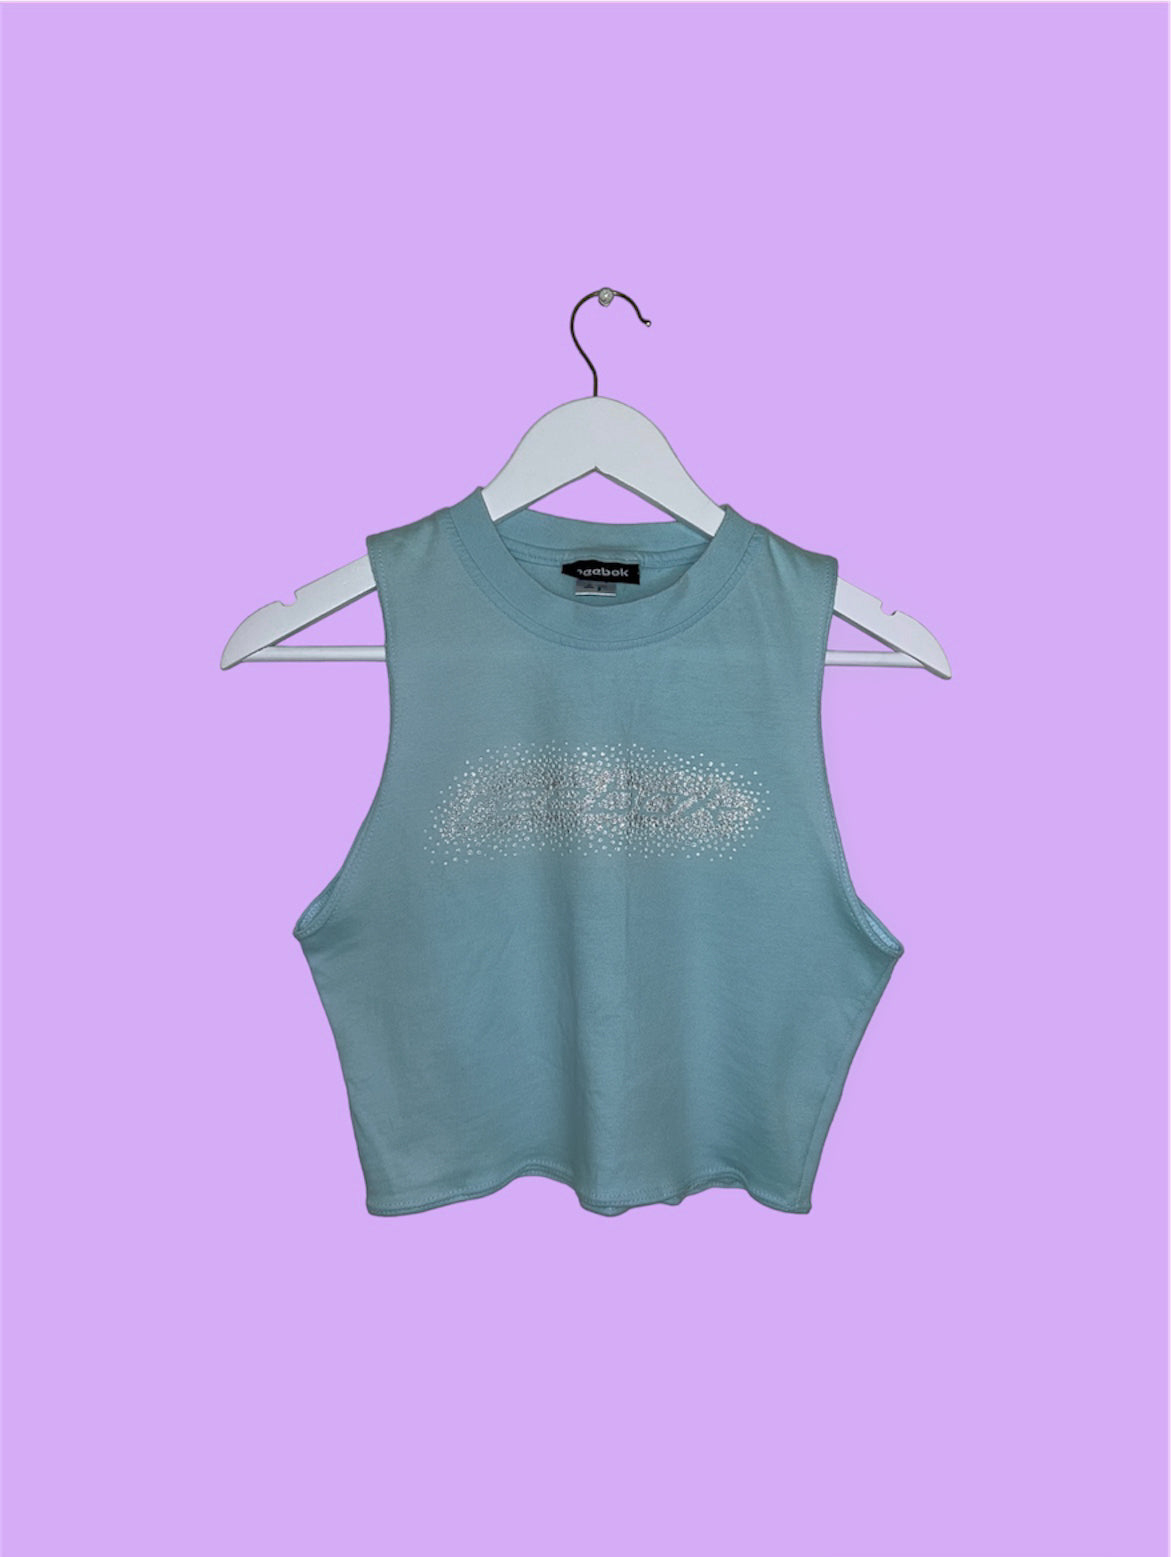 light blue sleeveless crop top with gem reebok logo shown on a lilac background